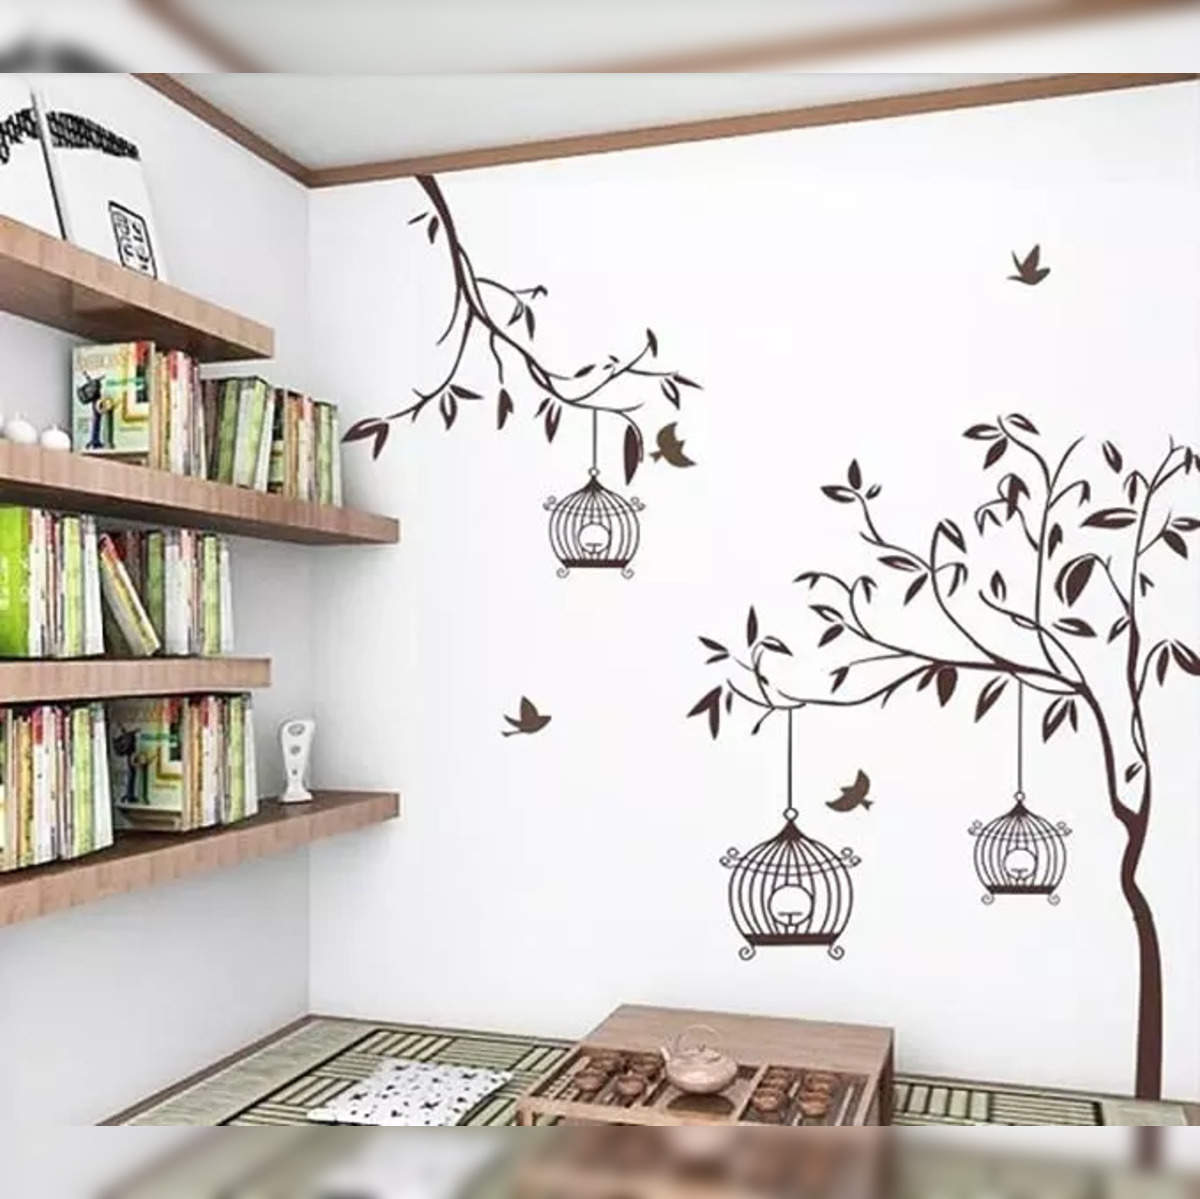 Image result for tree wall sticker